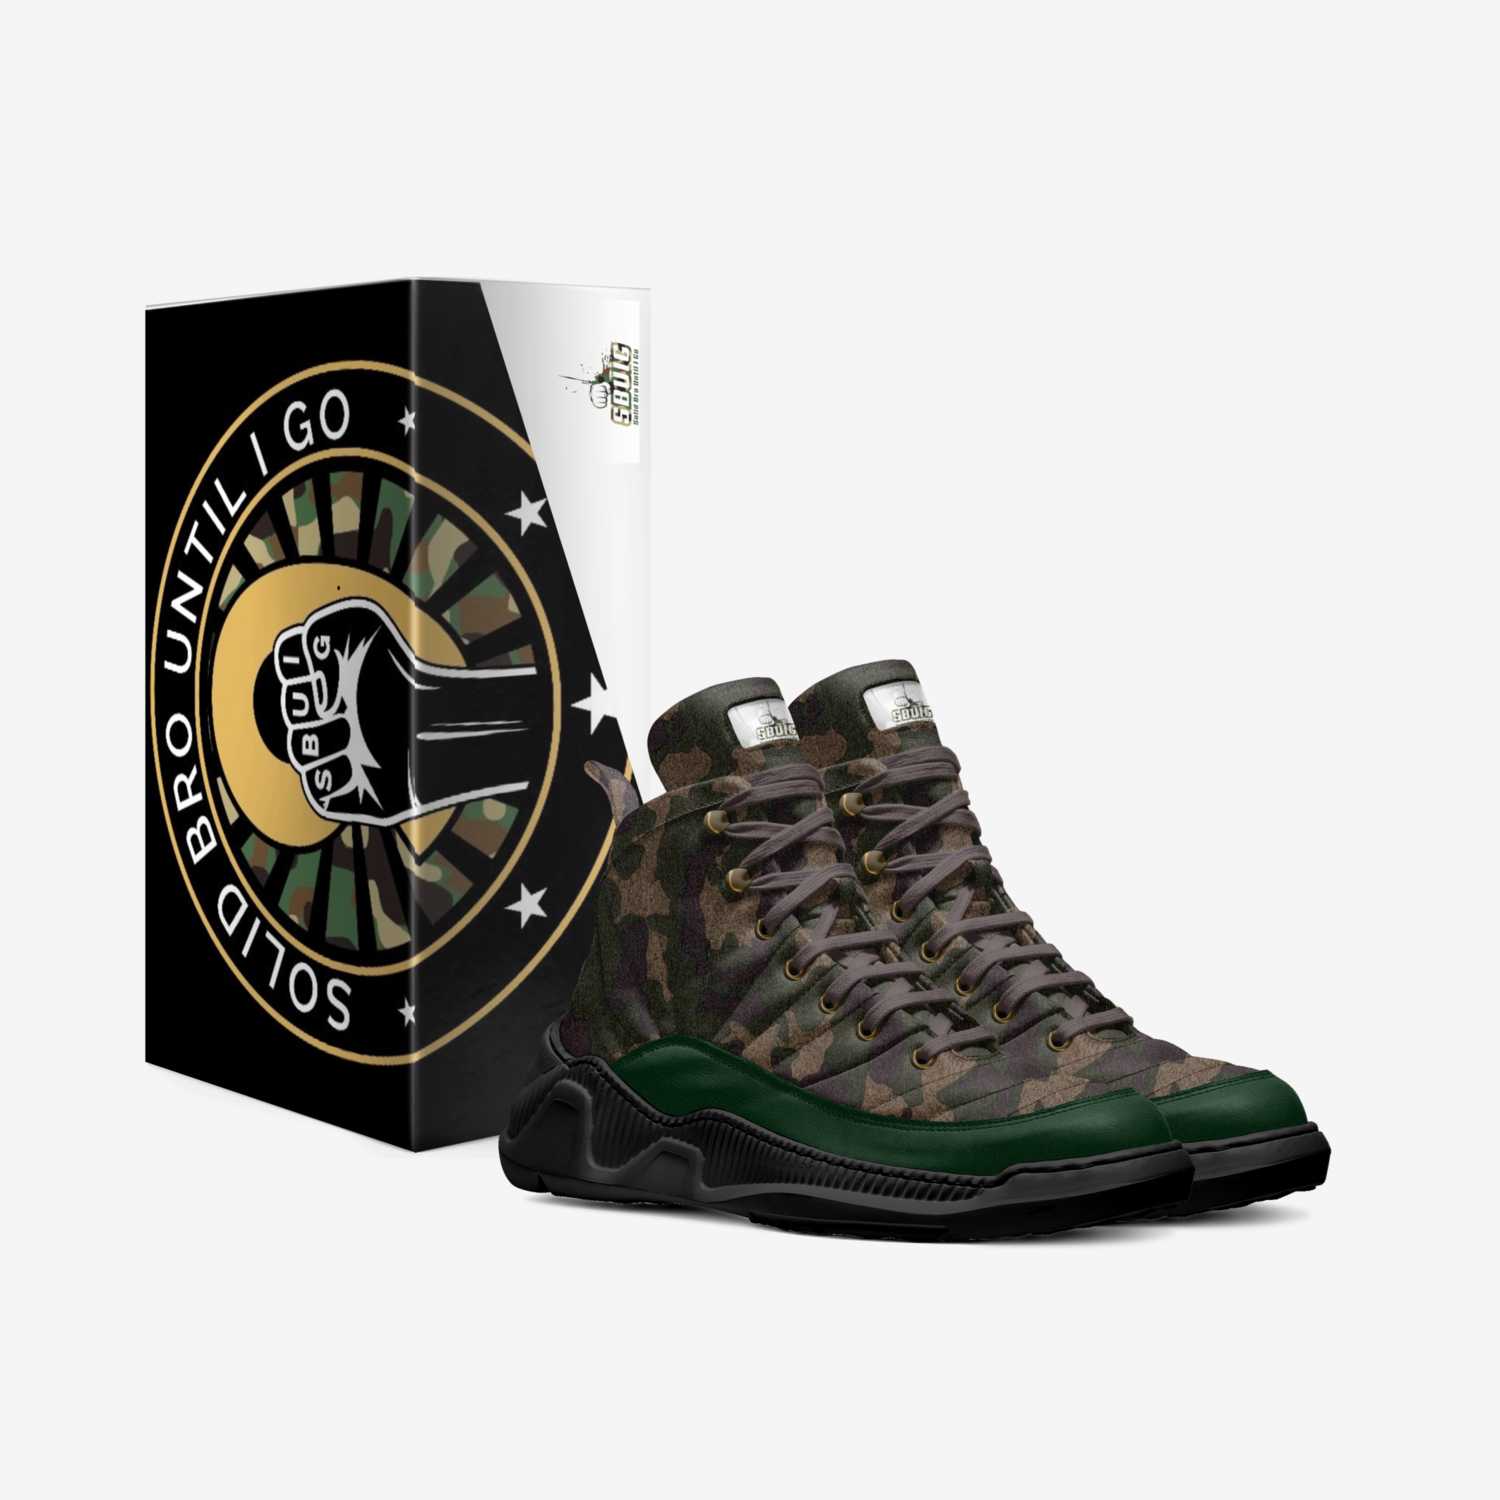 Solid 9’s custom made in Italy shoes by Sbuig Llc | Box view